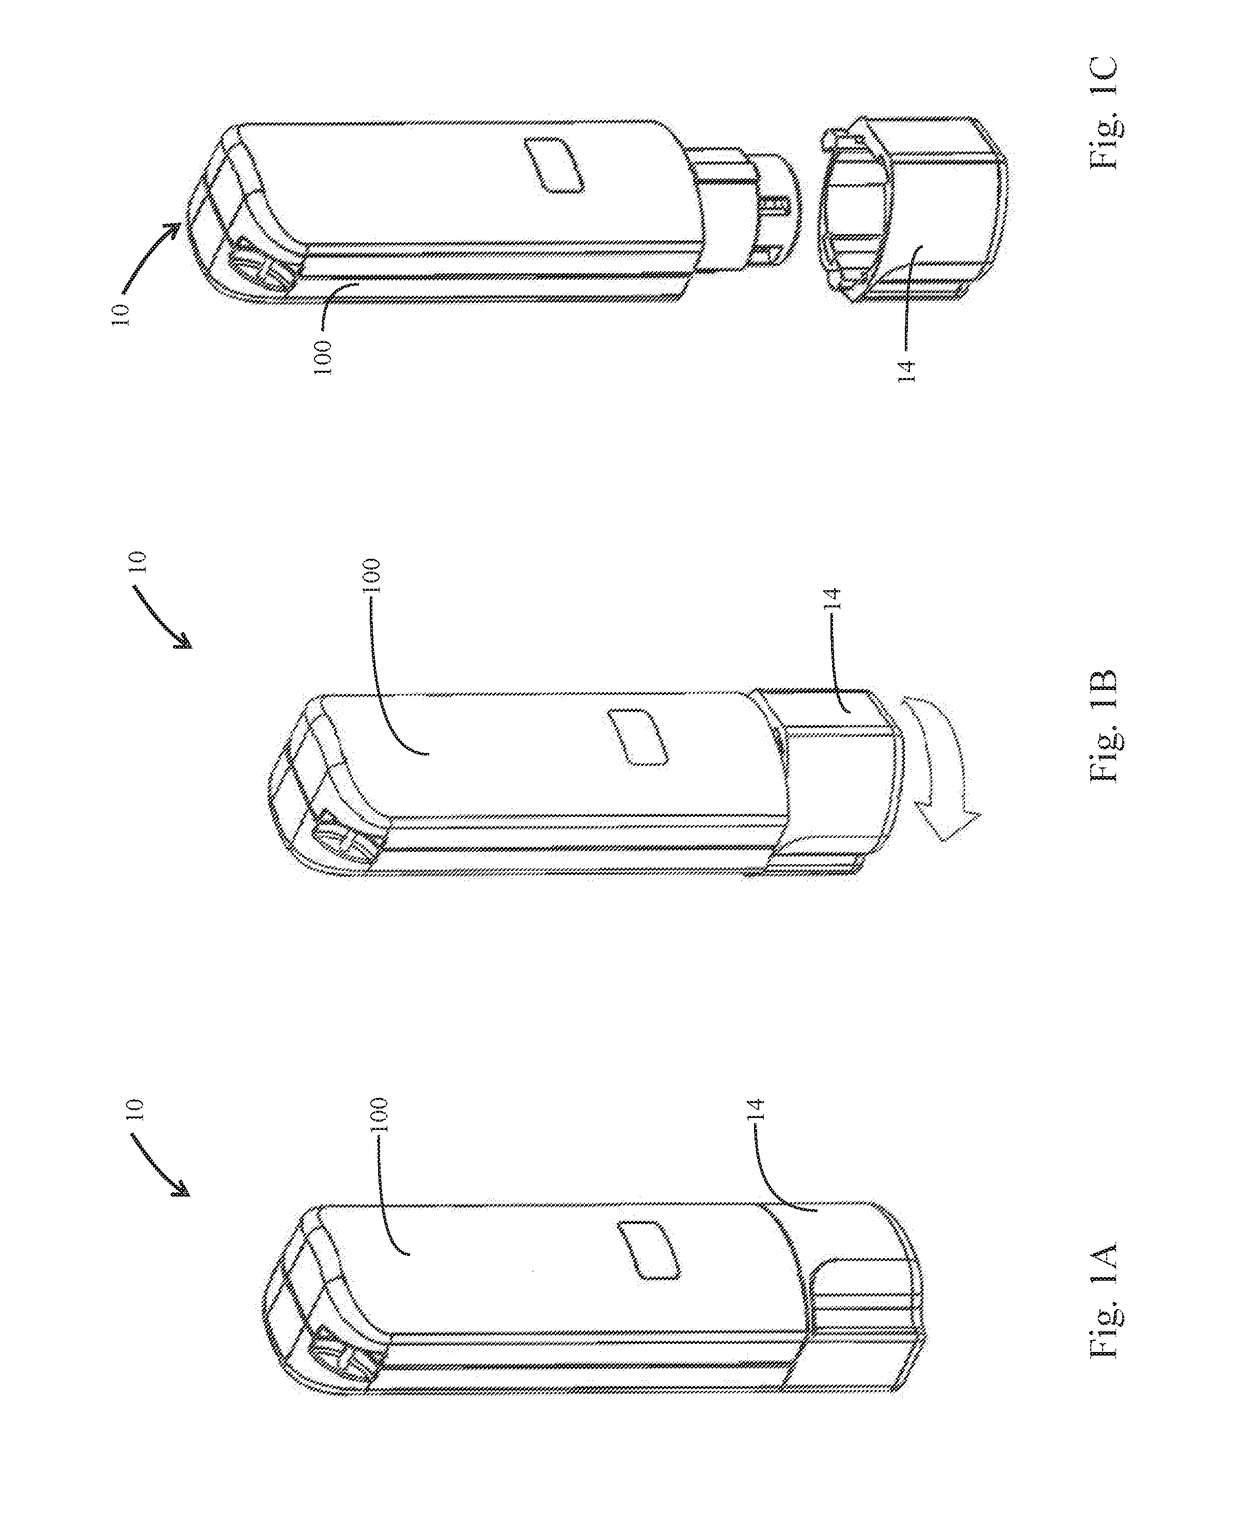 Mixing and Injection device with sterility features